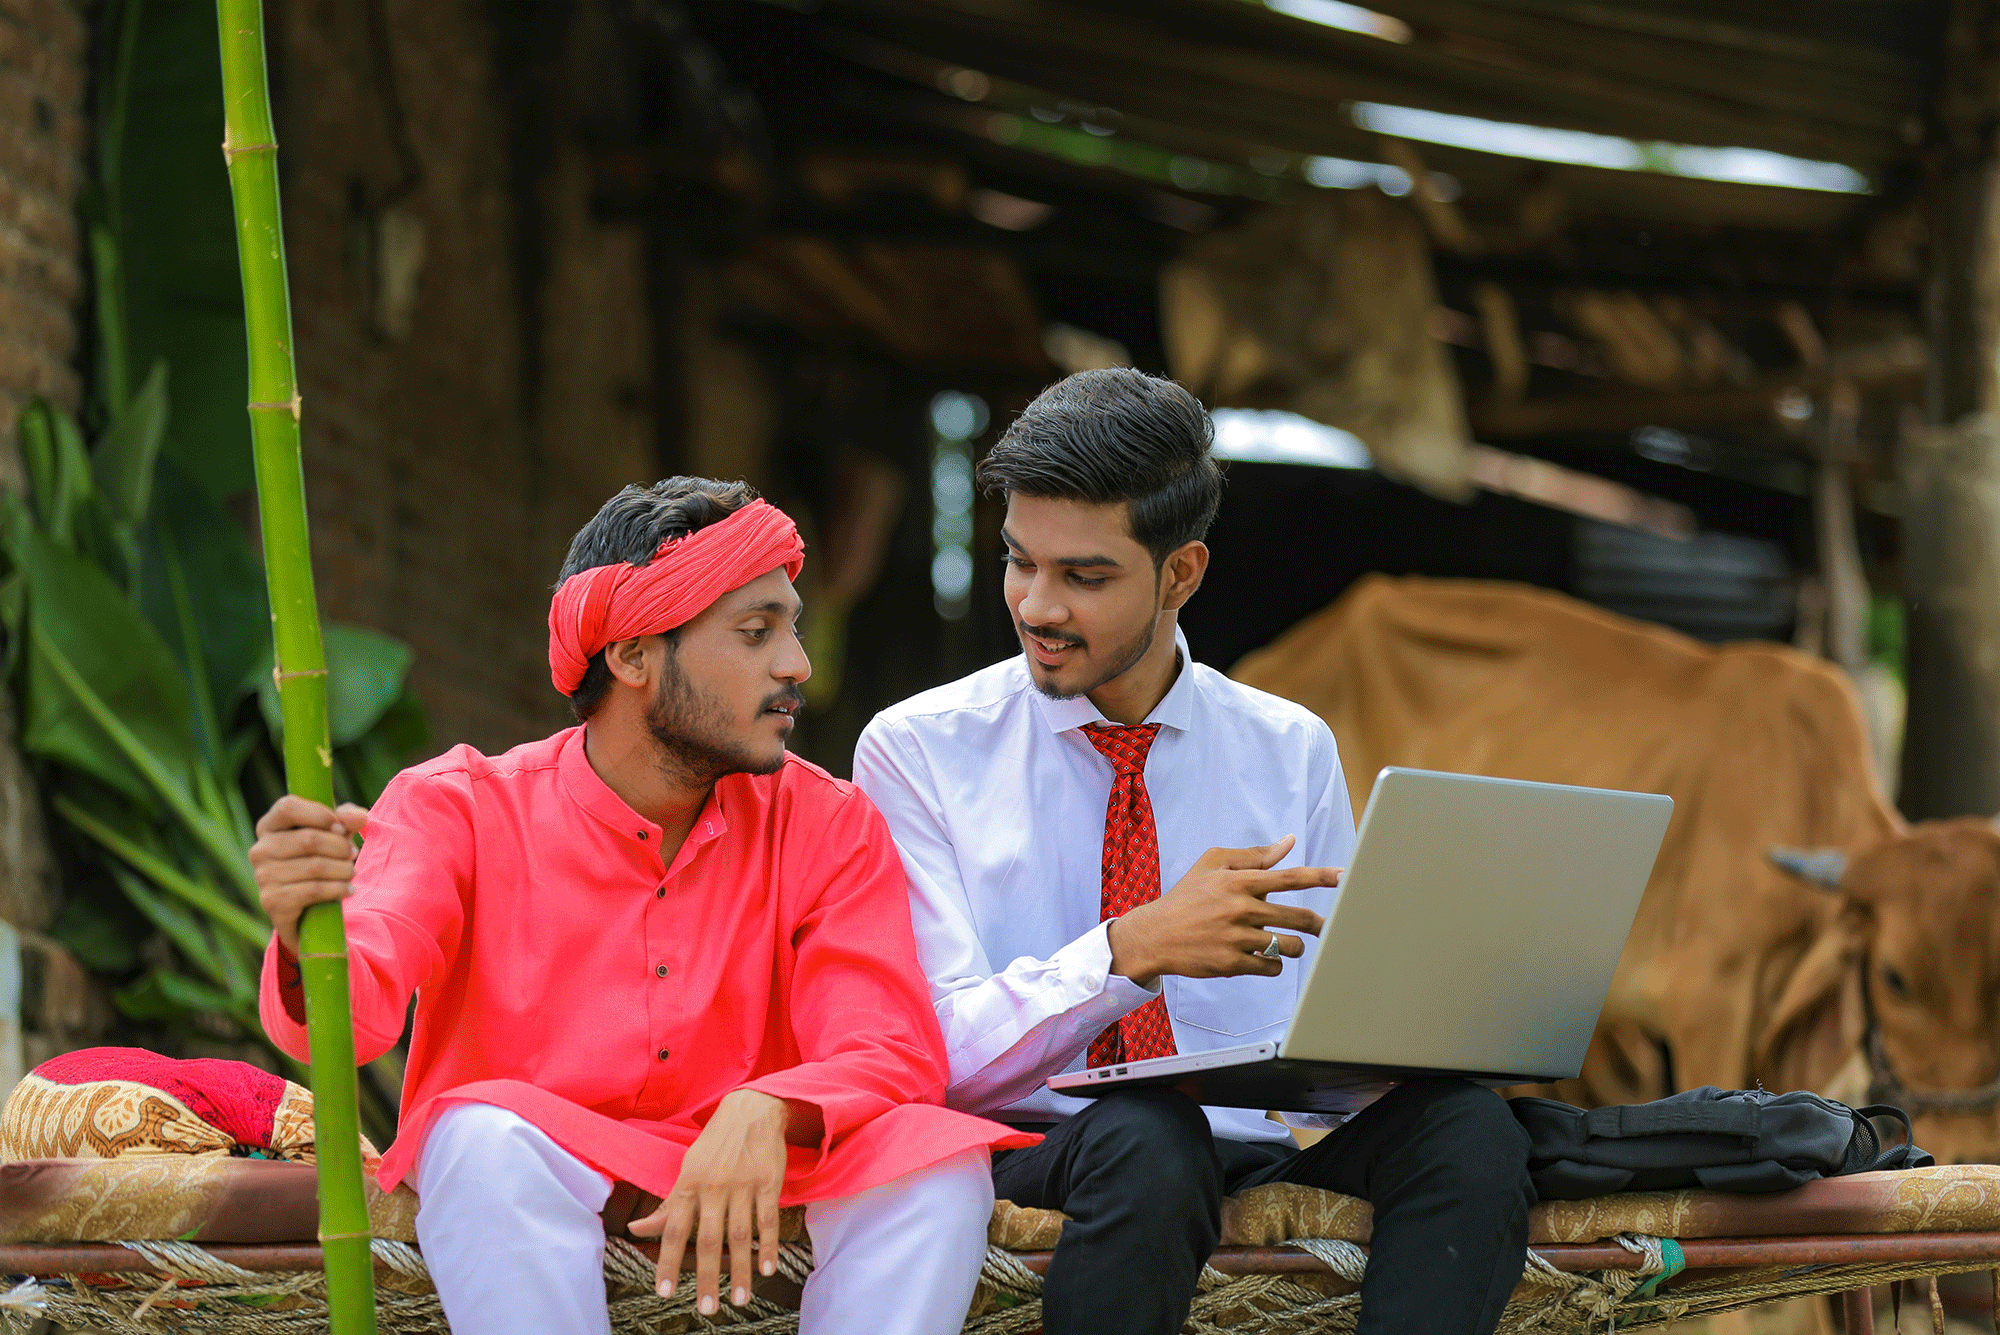 Young indian man showing information on his phone to another indian man in turban